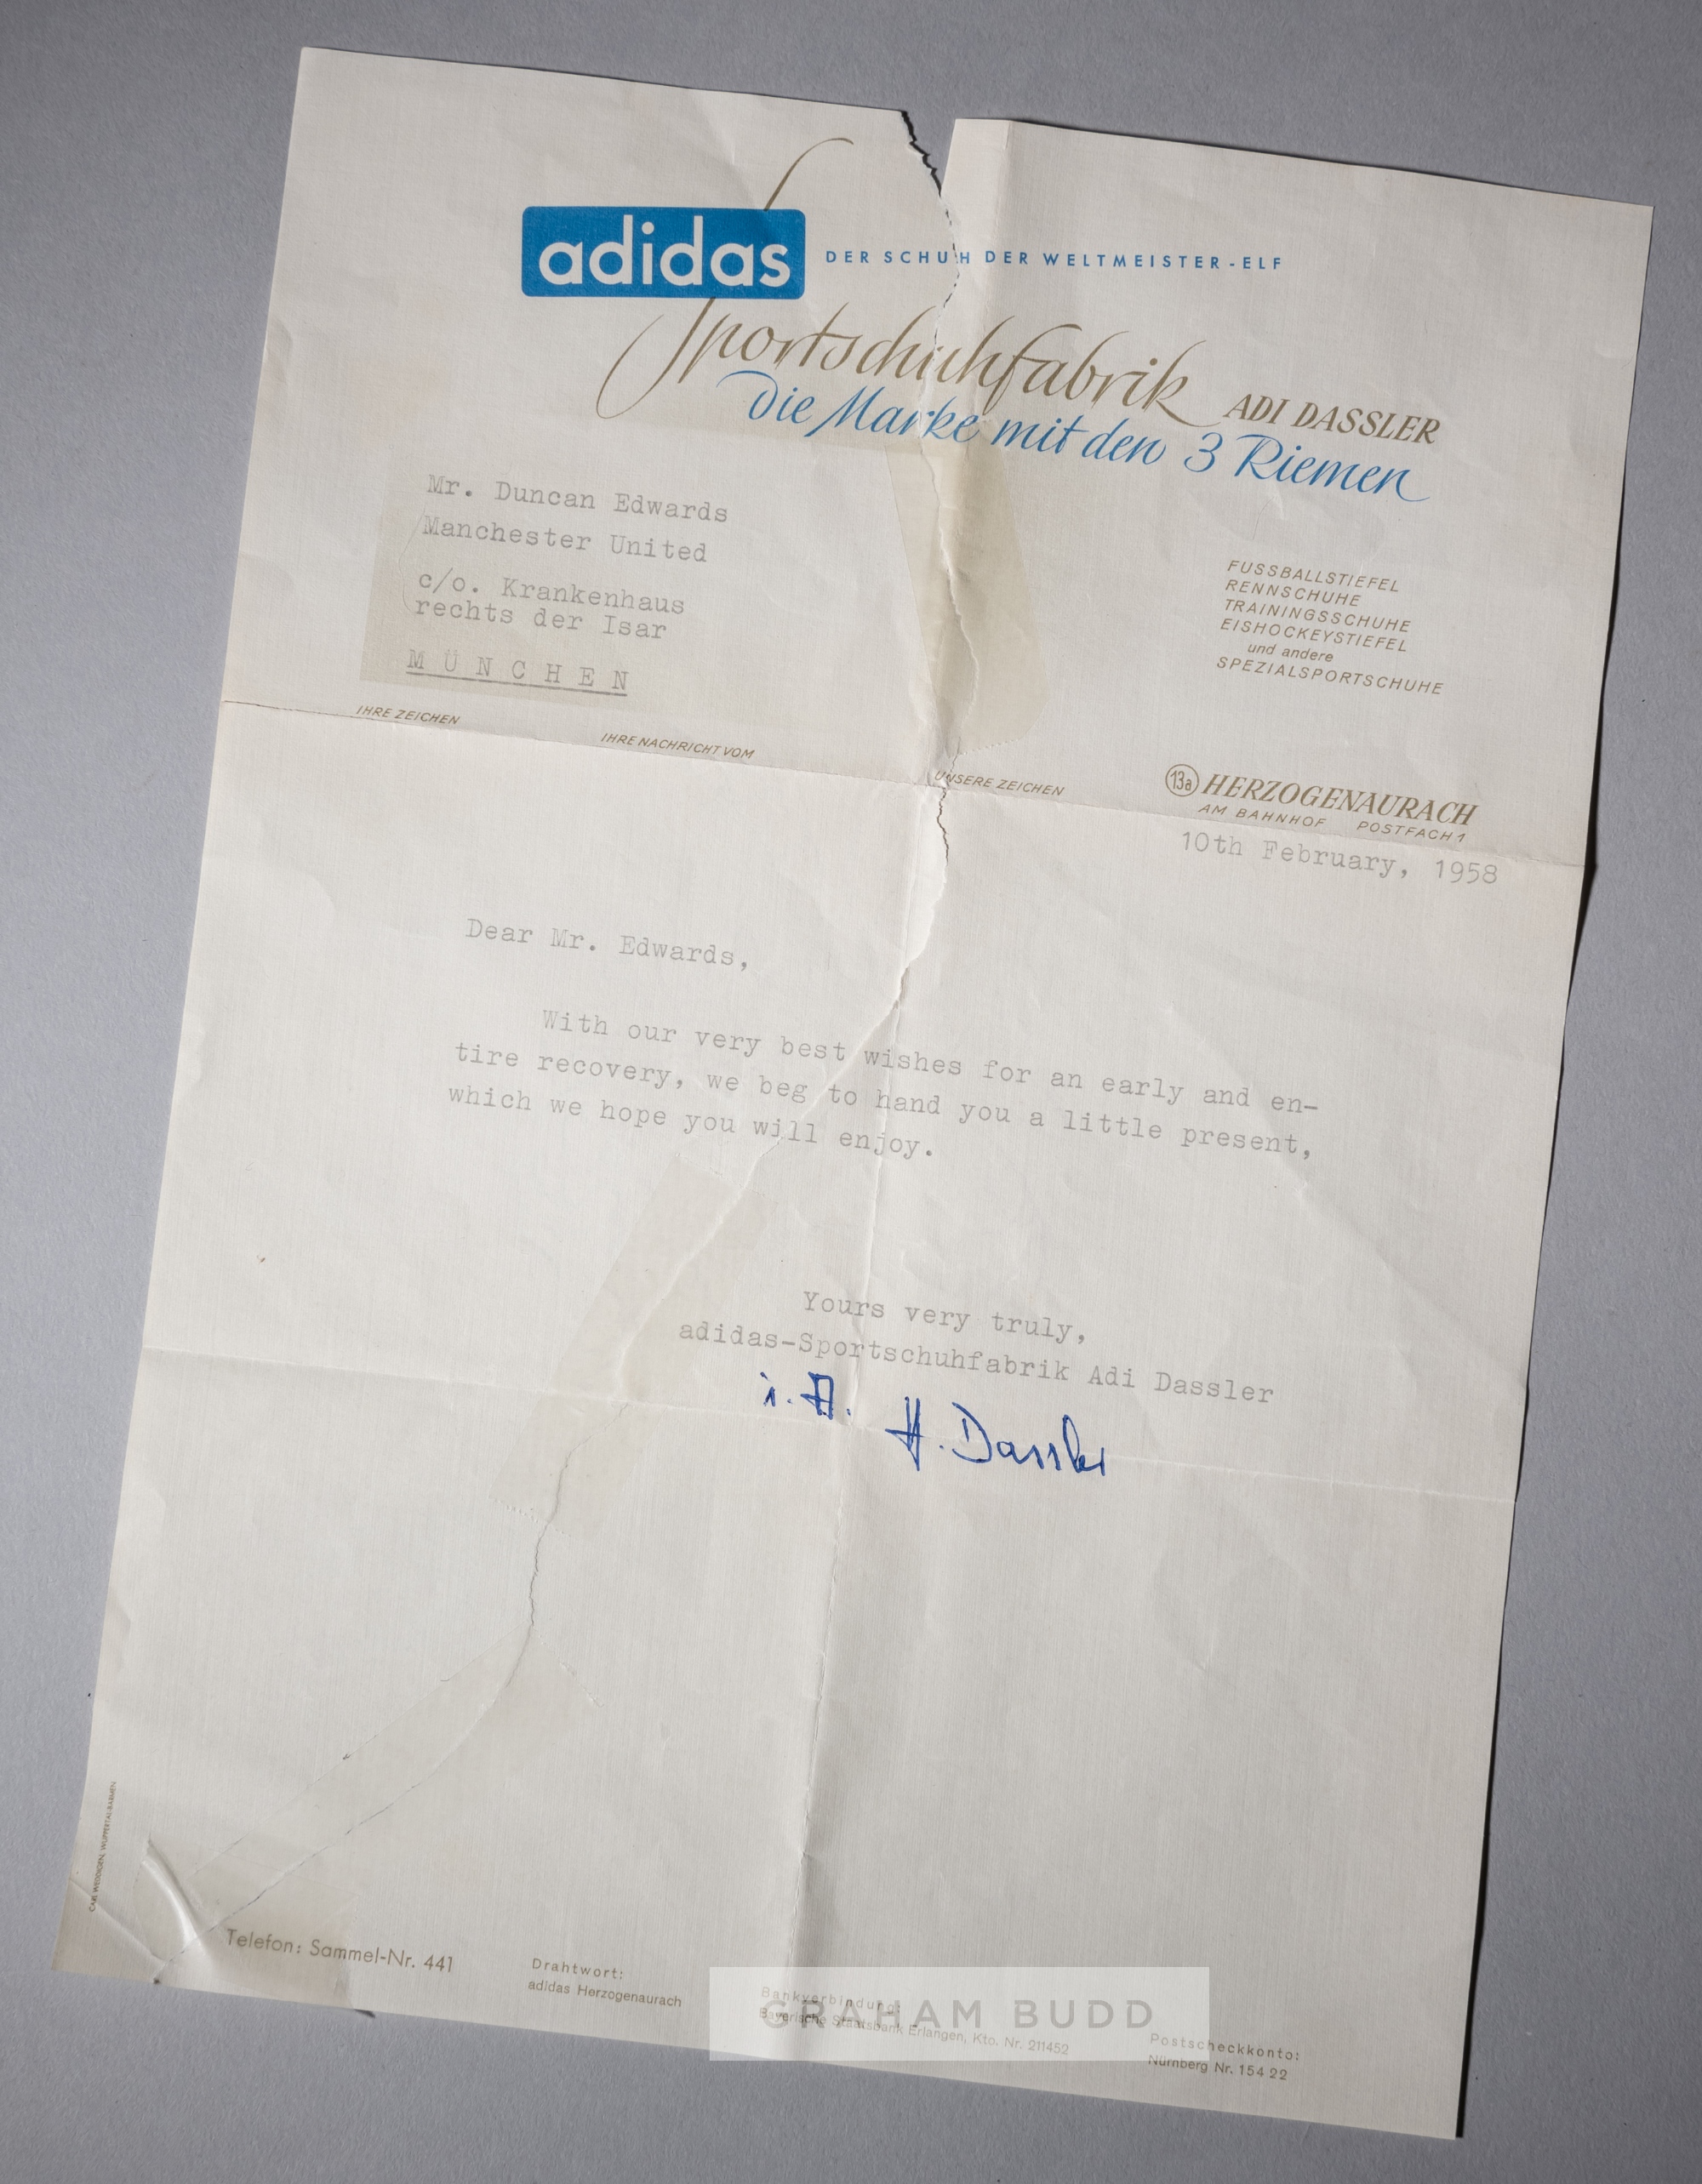 A signed typescript letter from Adi Dassler founder of Adidas sportswear to Duncan Edwards of